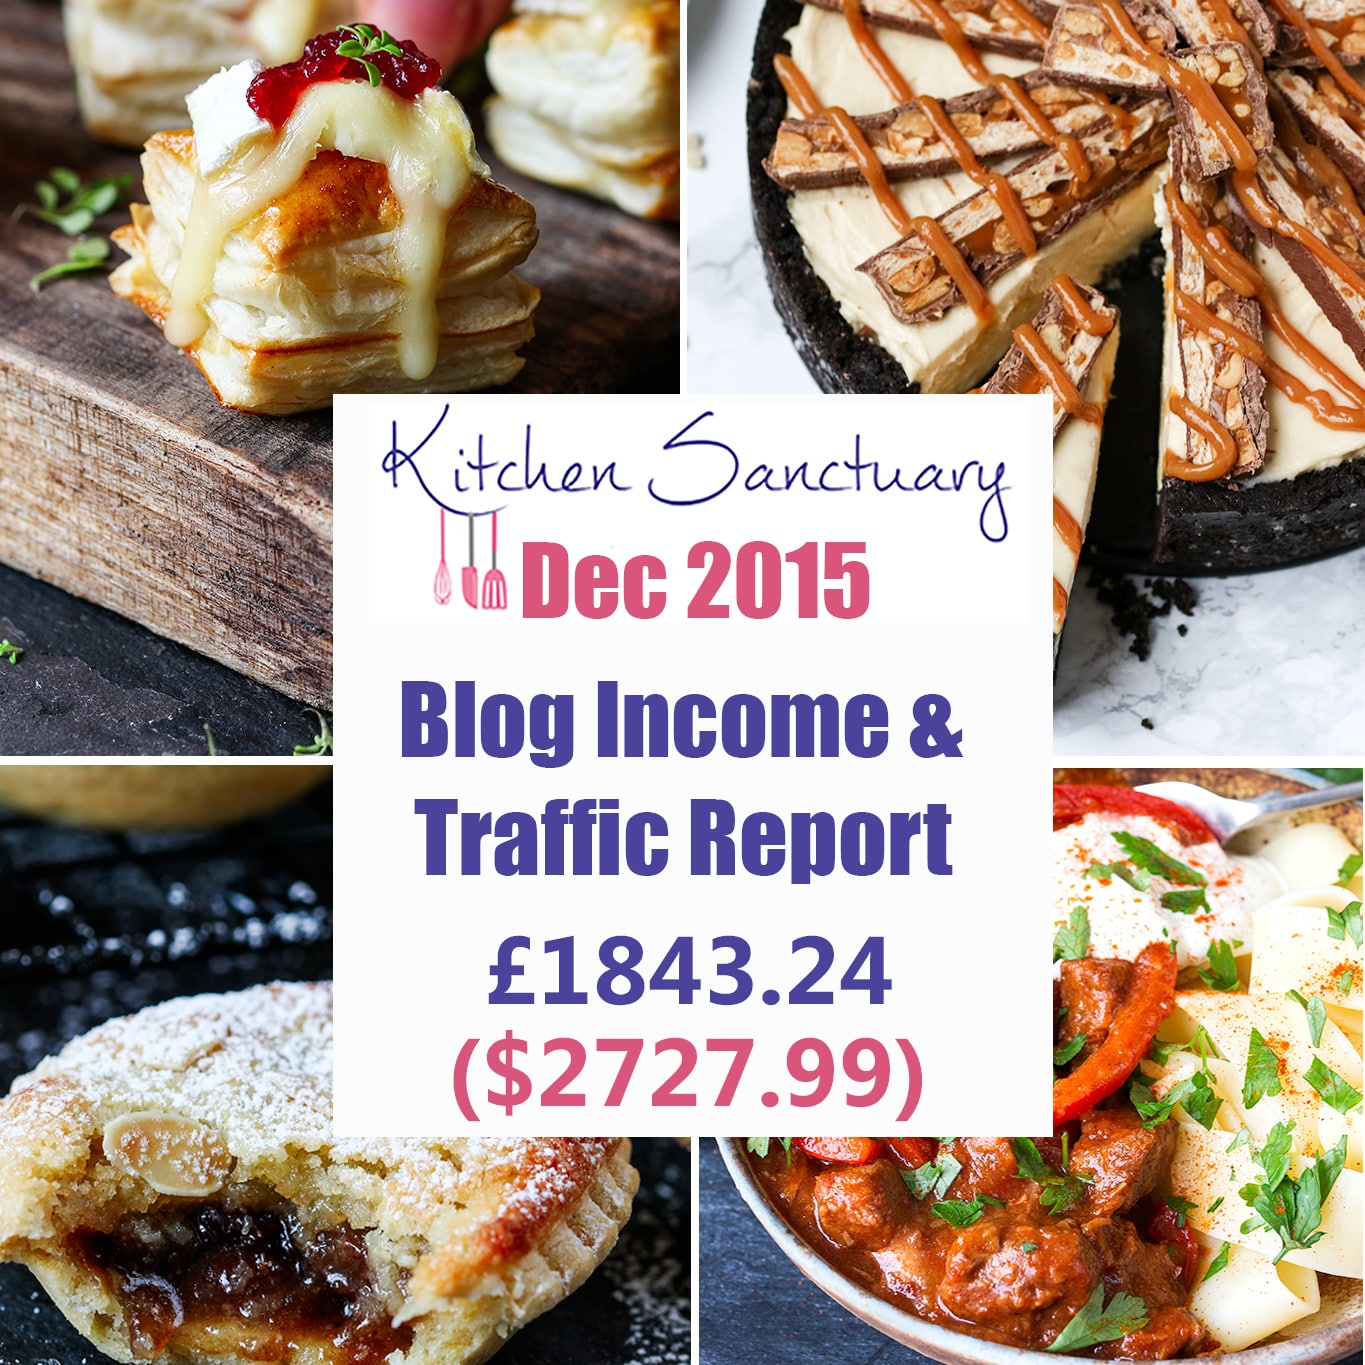 blog income and traffic report december 2015